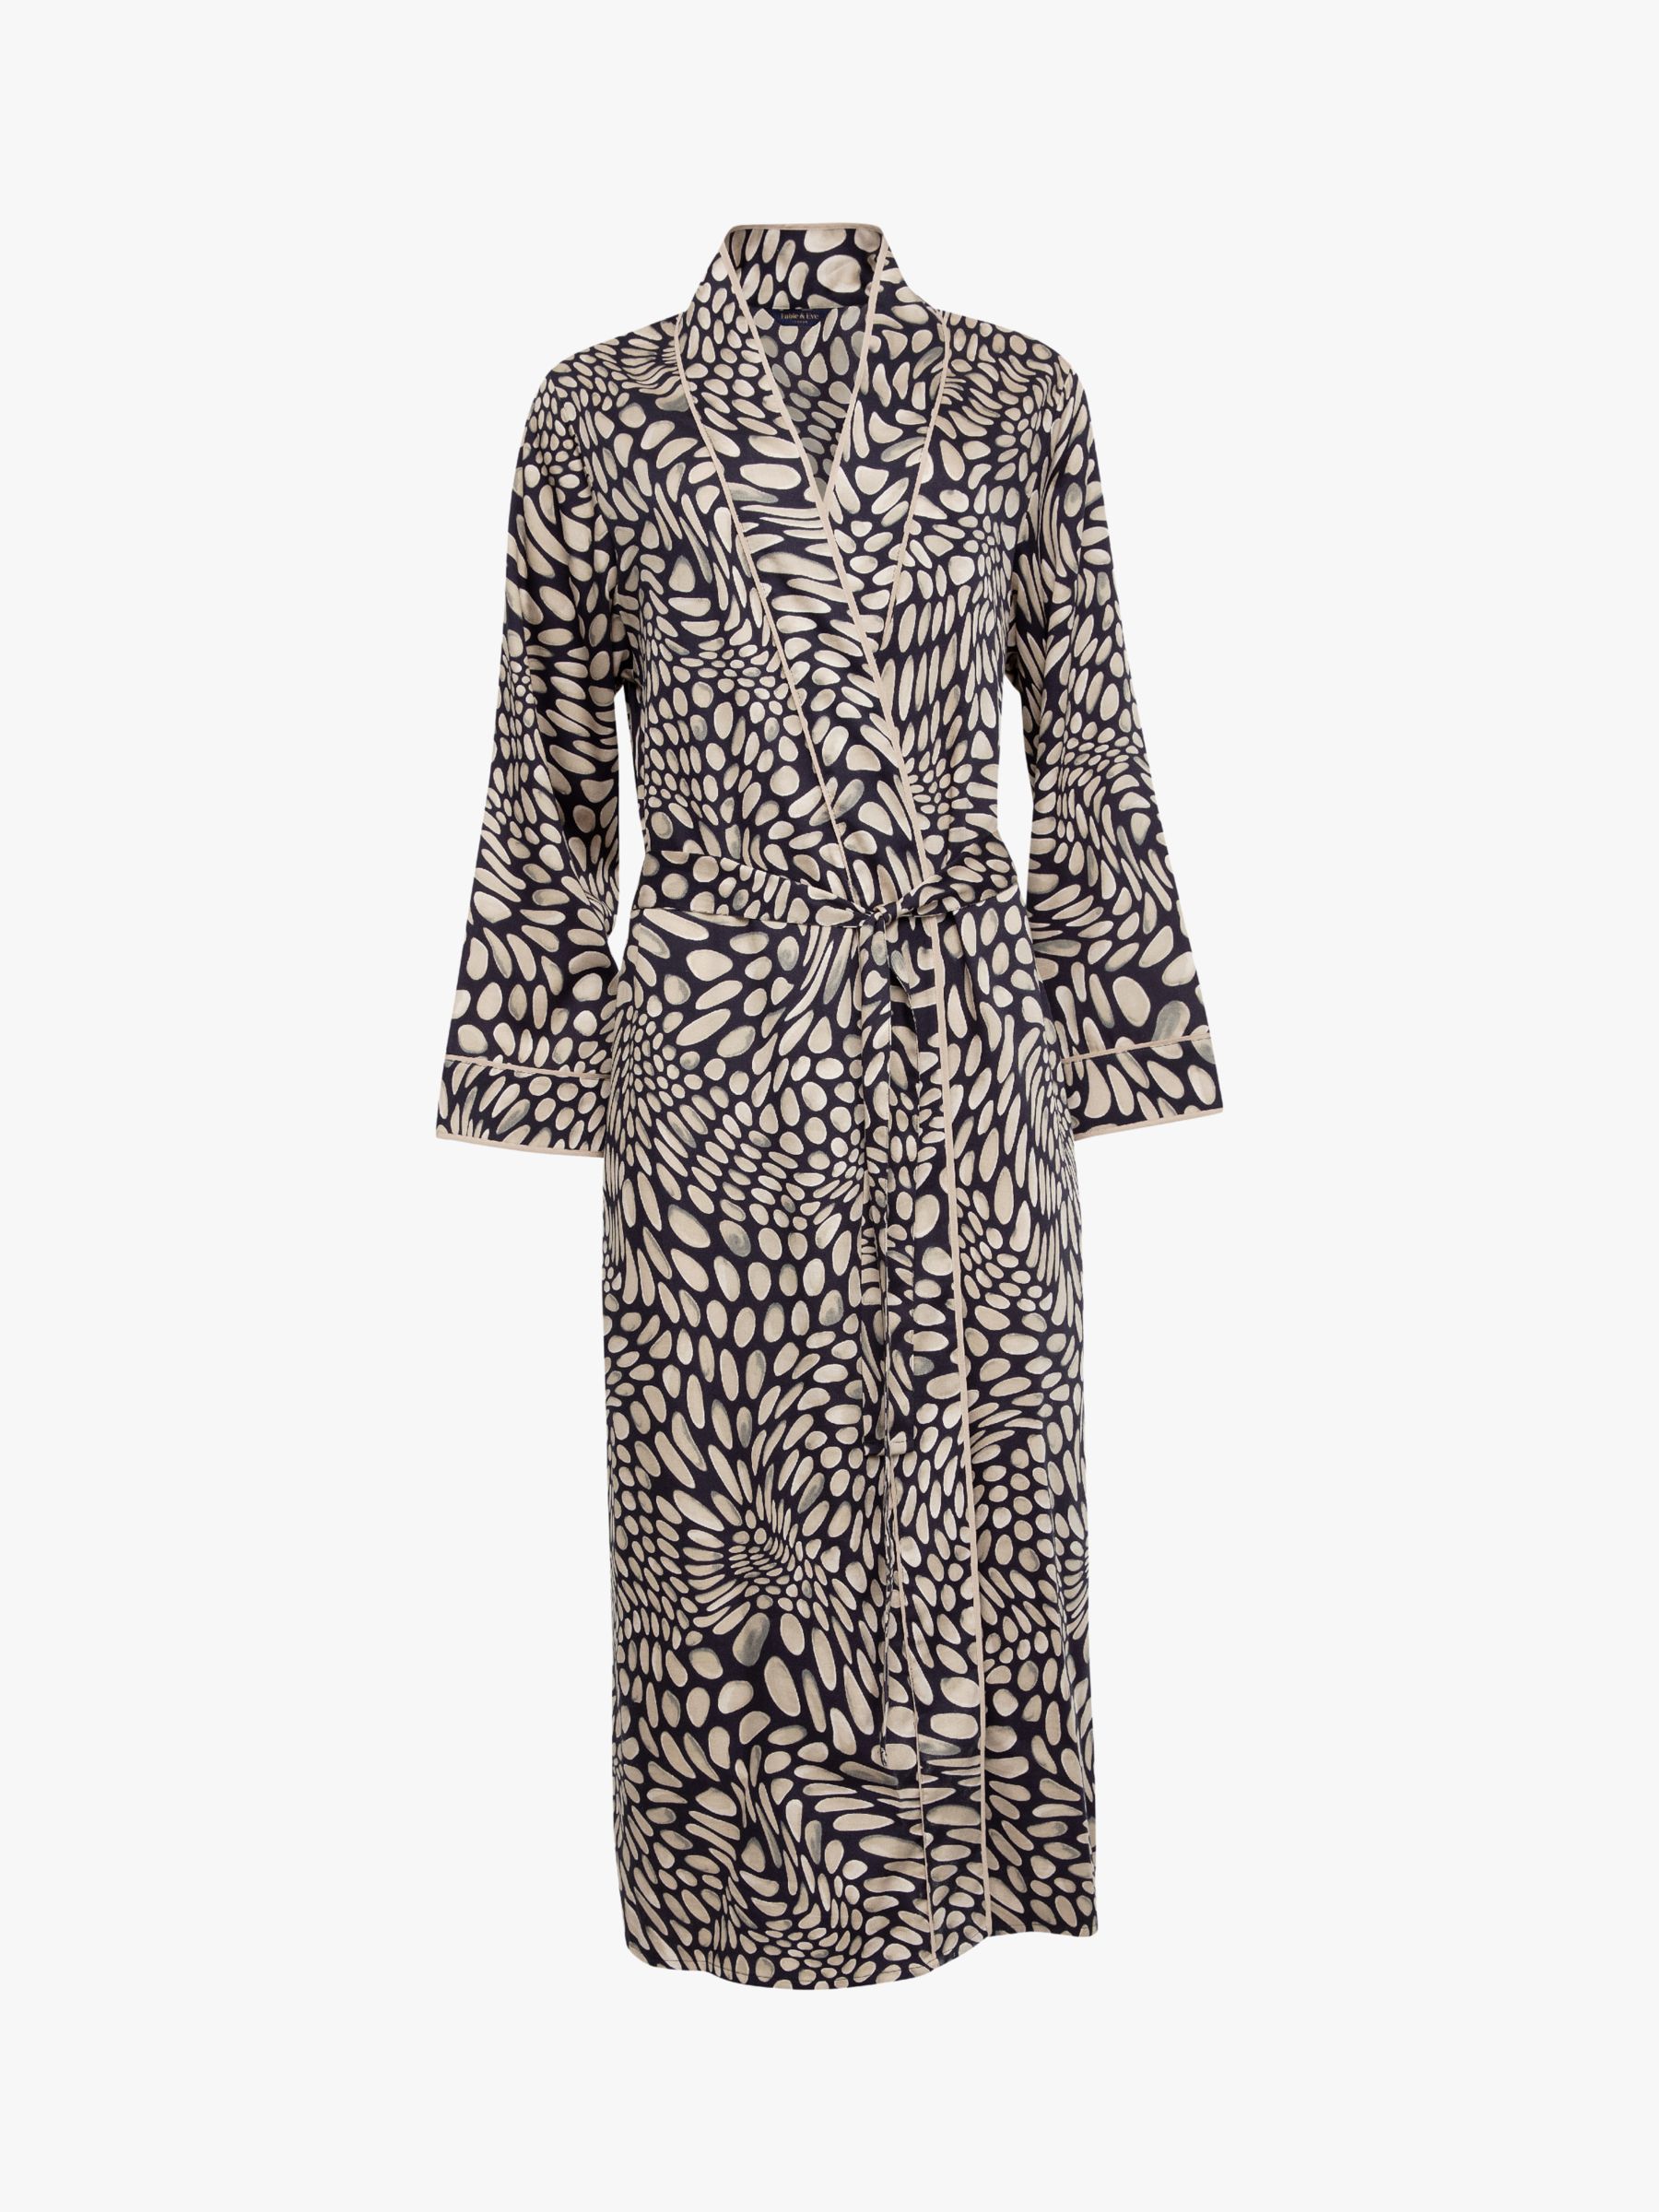 Fable & Eve Carnaby Pebble Dressing Gown, Black/Beige at John Lewis ...